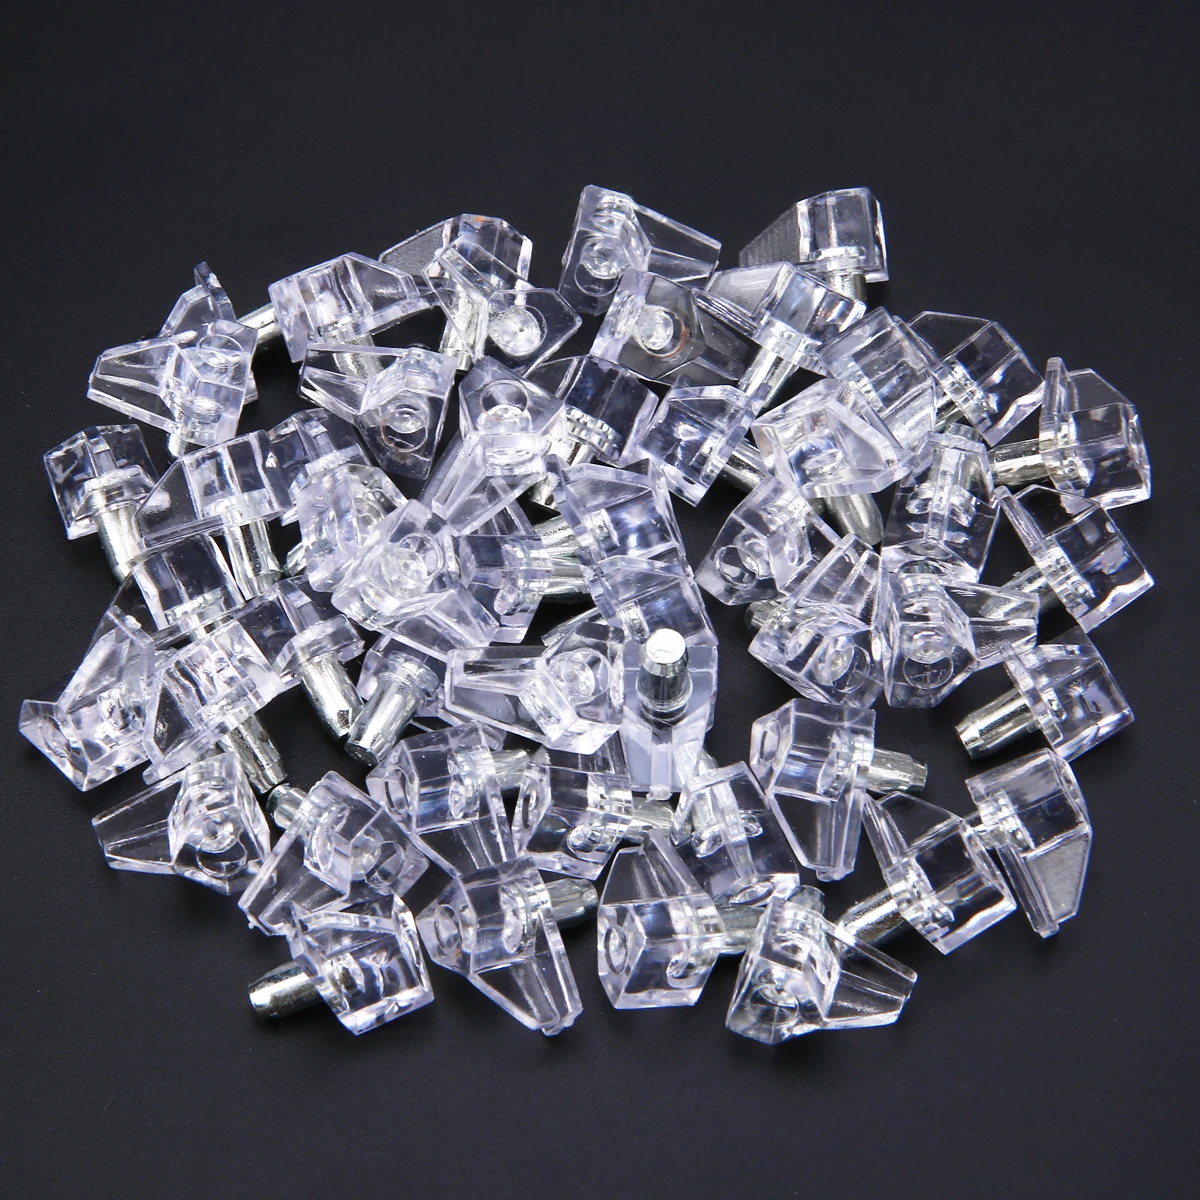 

Mayitr 50pcs 5mm Clear Plastic Shelf Supports Kitchen Cabinet Pegs Studs with Metal Pin For DIY Kitchen Cabinet Shelves Tools